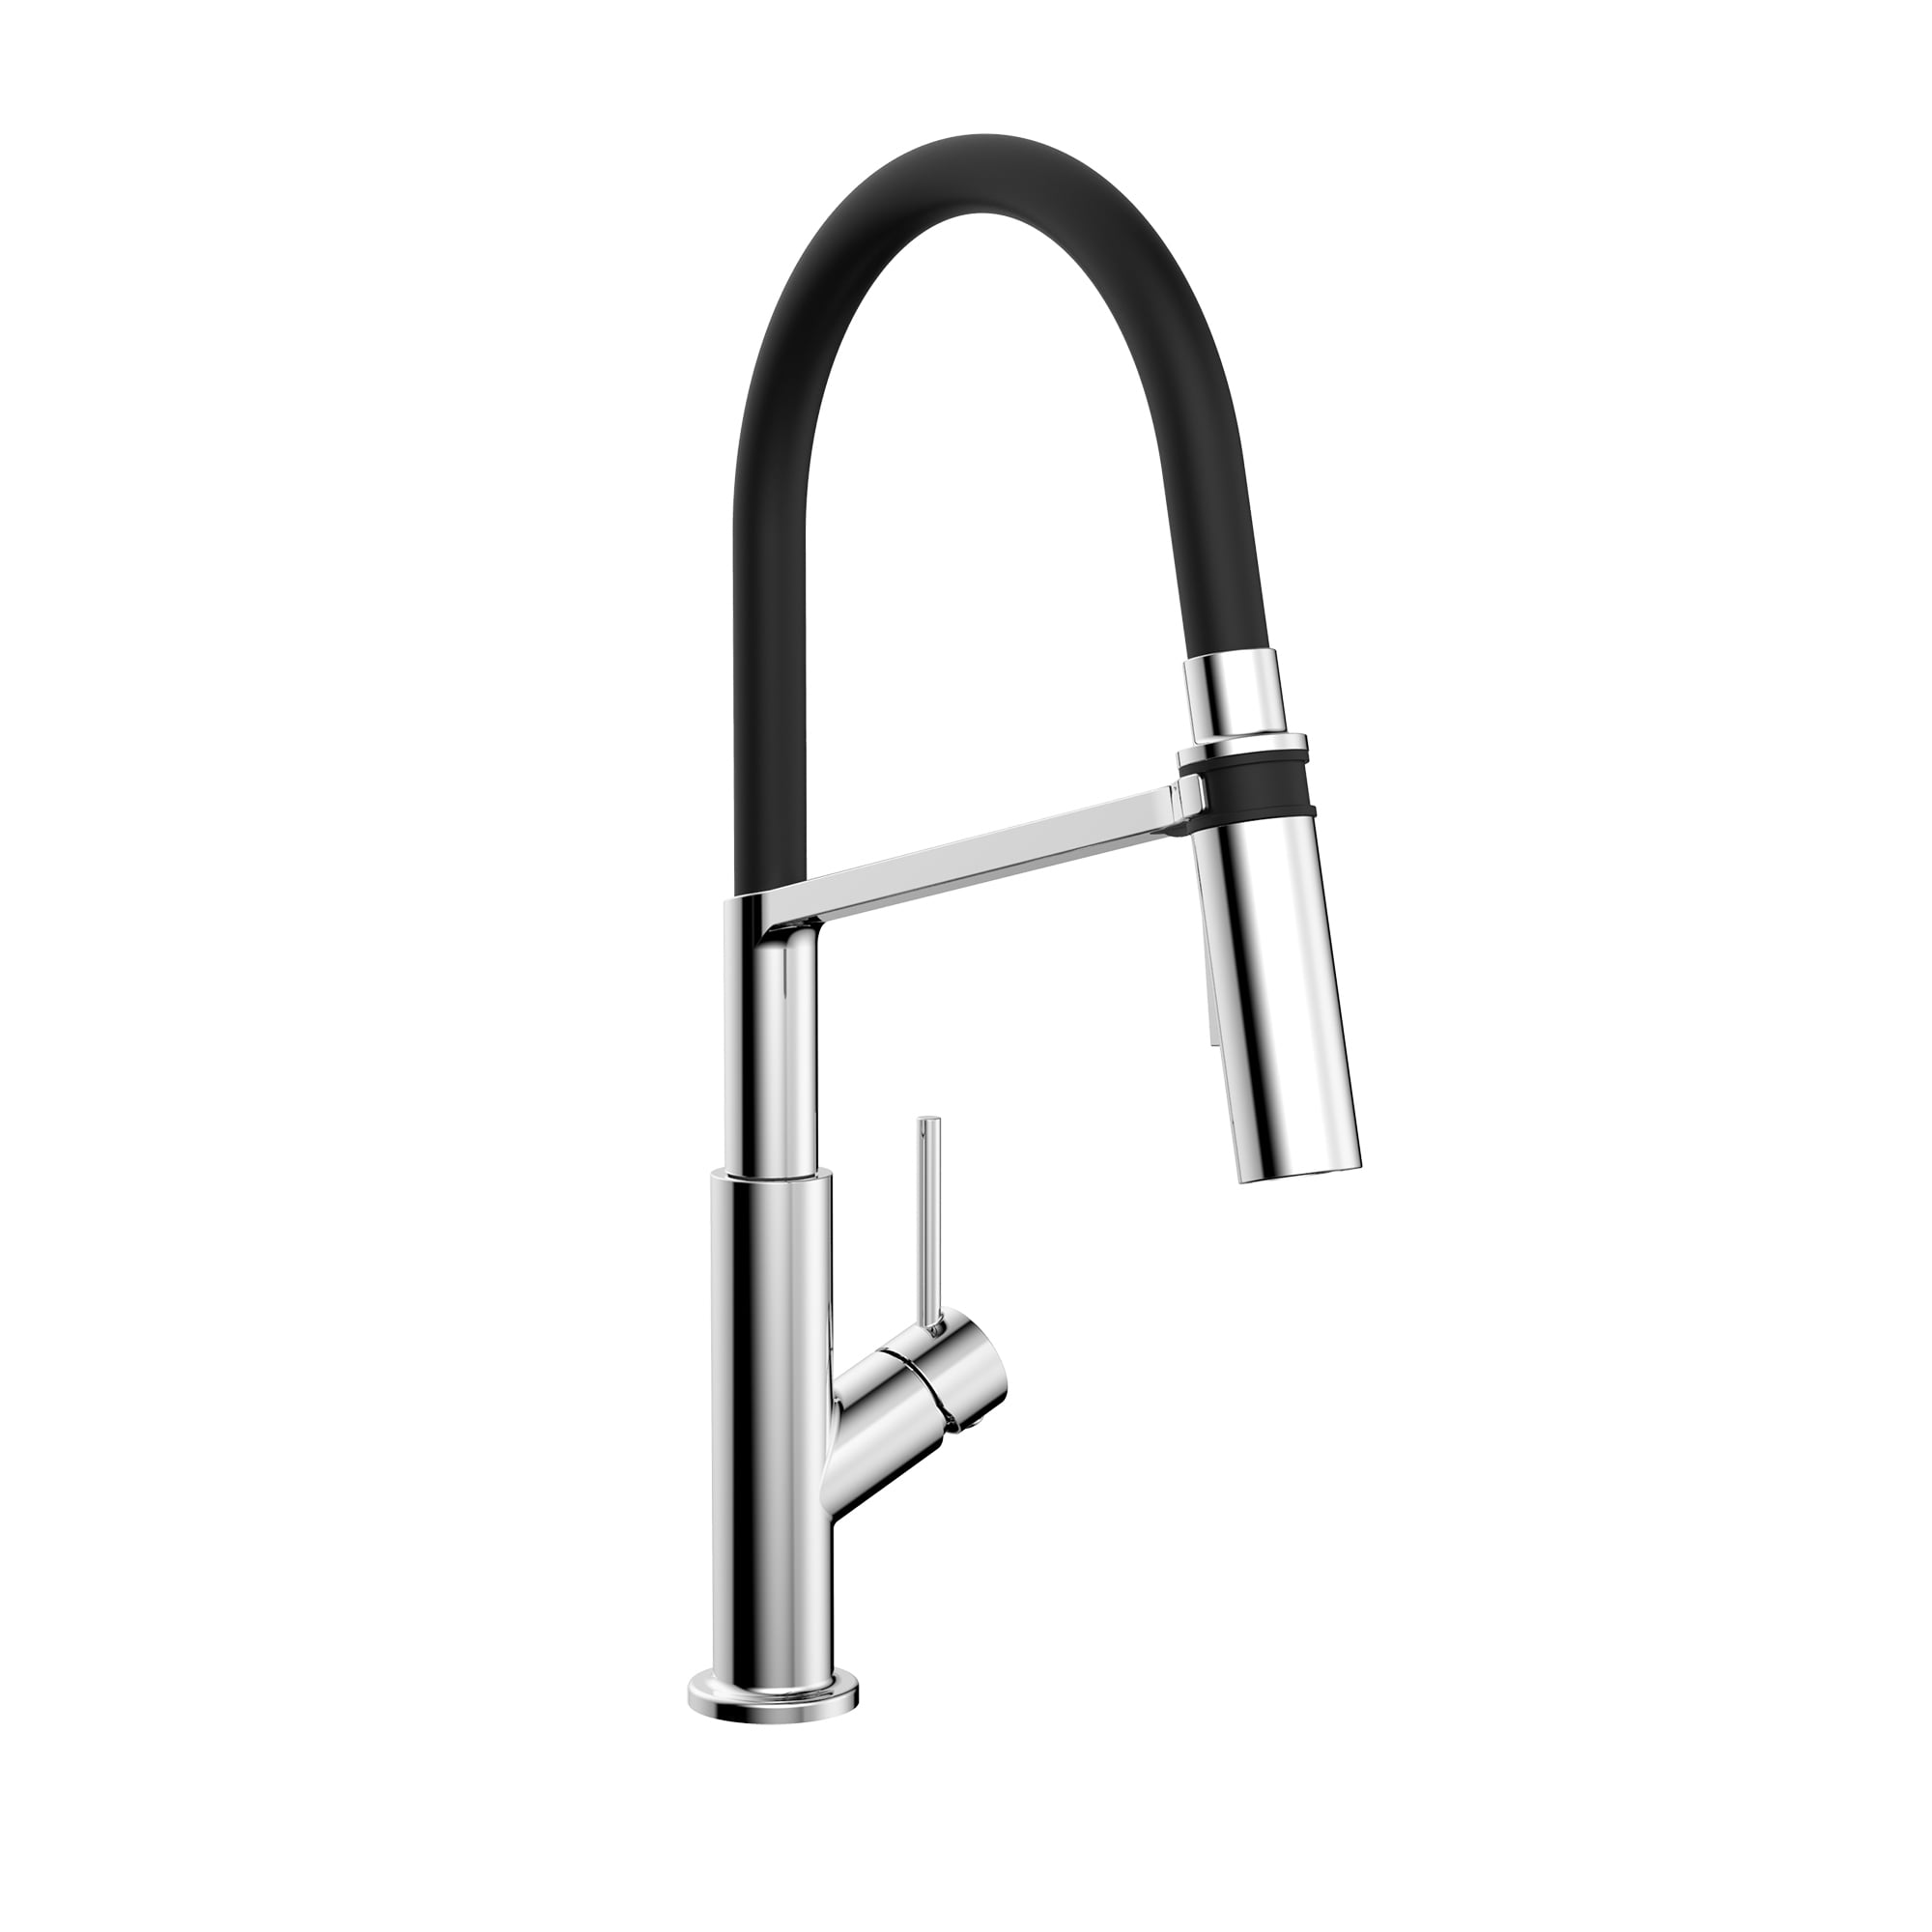 Keeney Mag78ccp Single Handle Pull Down Kitchen Faucet